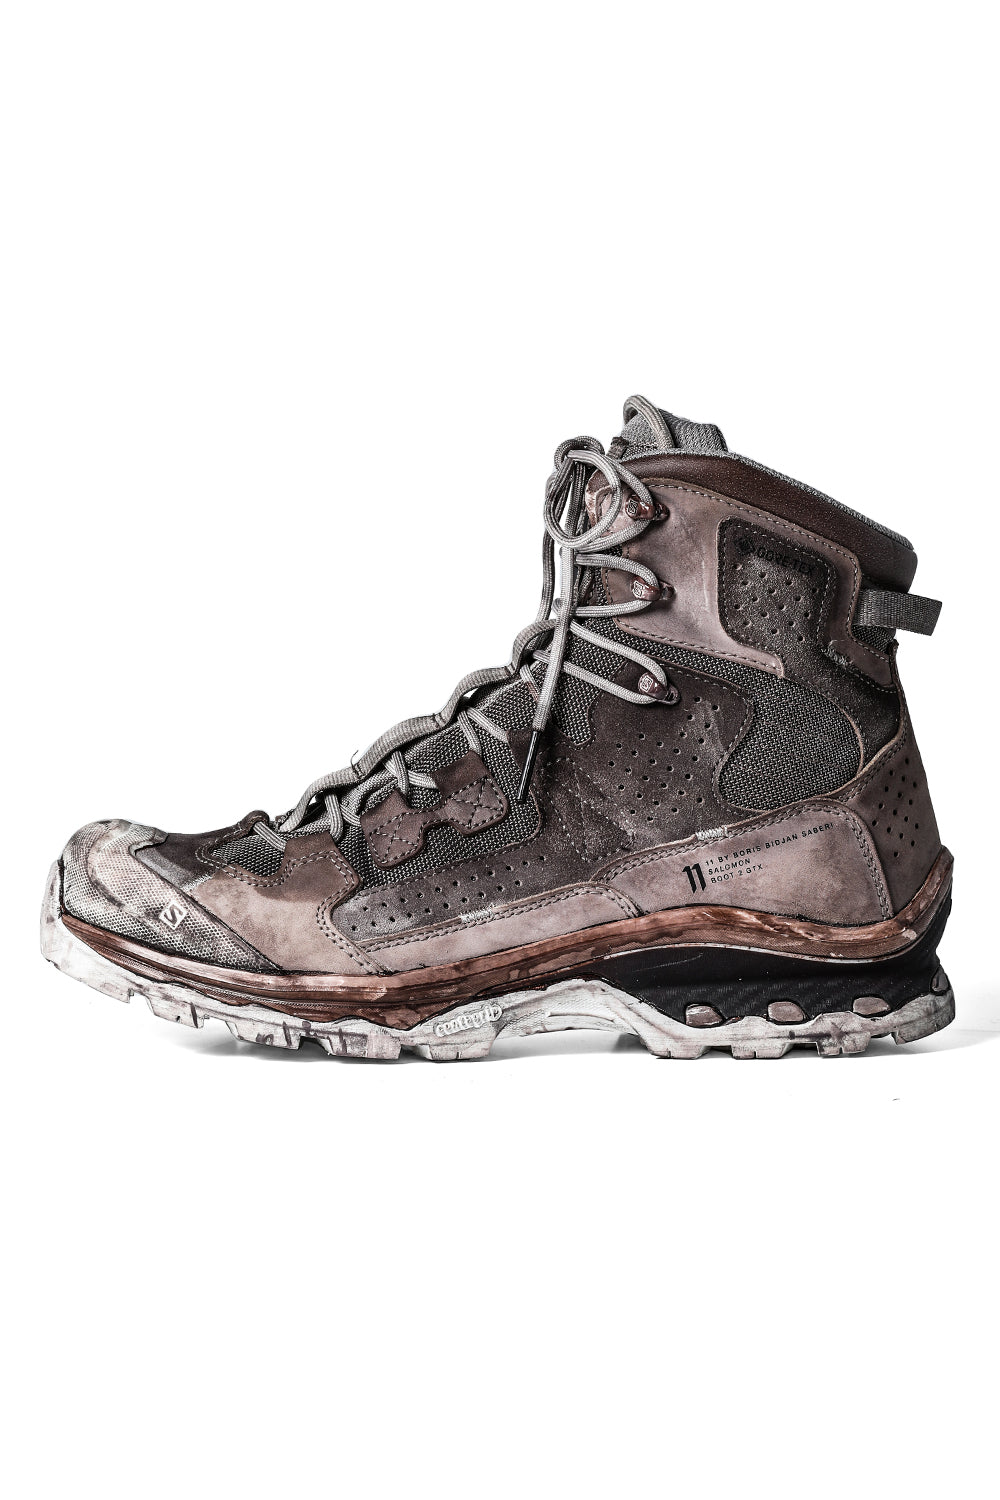 BOOT2-GTX-WH-LR-ALL-DIRTY-GREY | BOOT2 GTX WH/LR/ALL DIRTY GREY